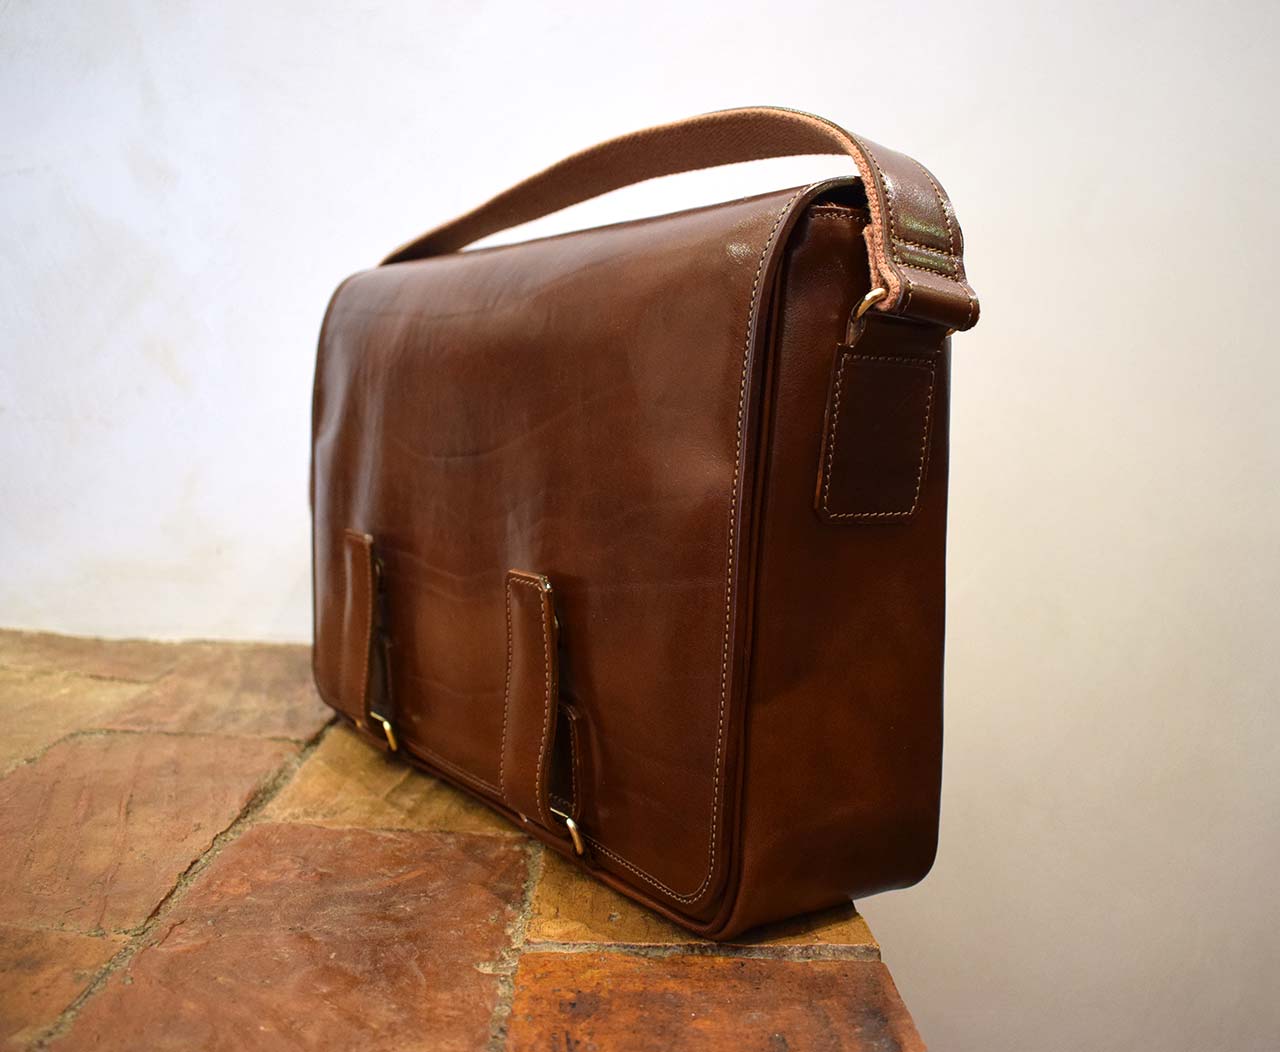 Securitas, Italian leather handmade briefcase by Mancini Leather Since 1918